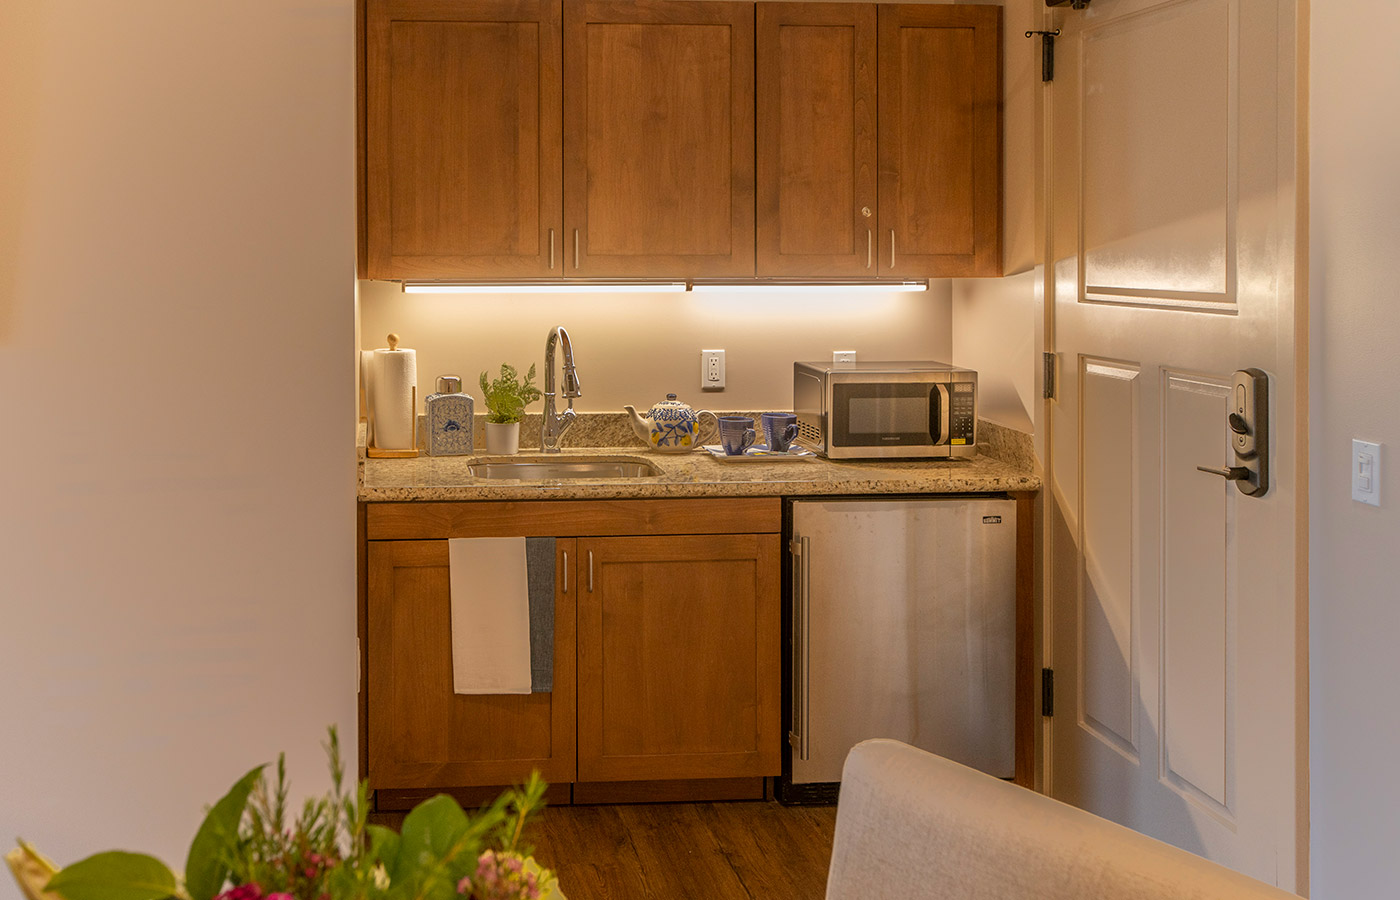 A kitchen in an apartment at The Watermark at San Ramon.
